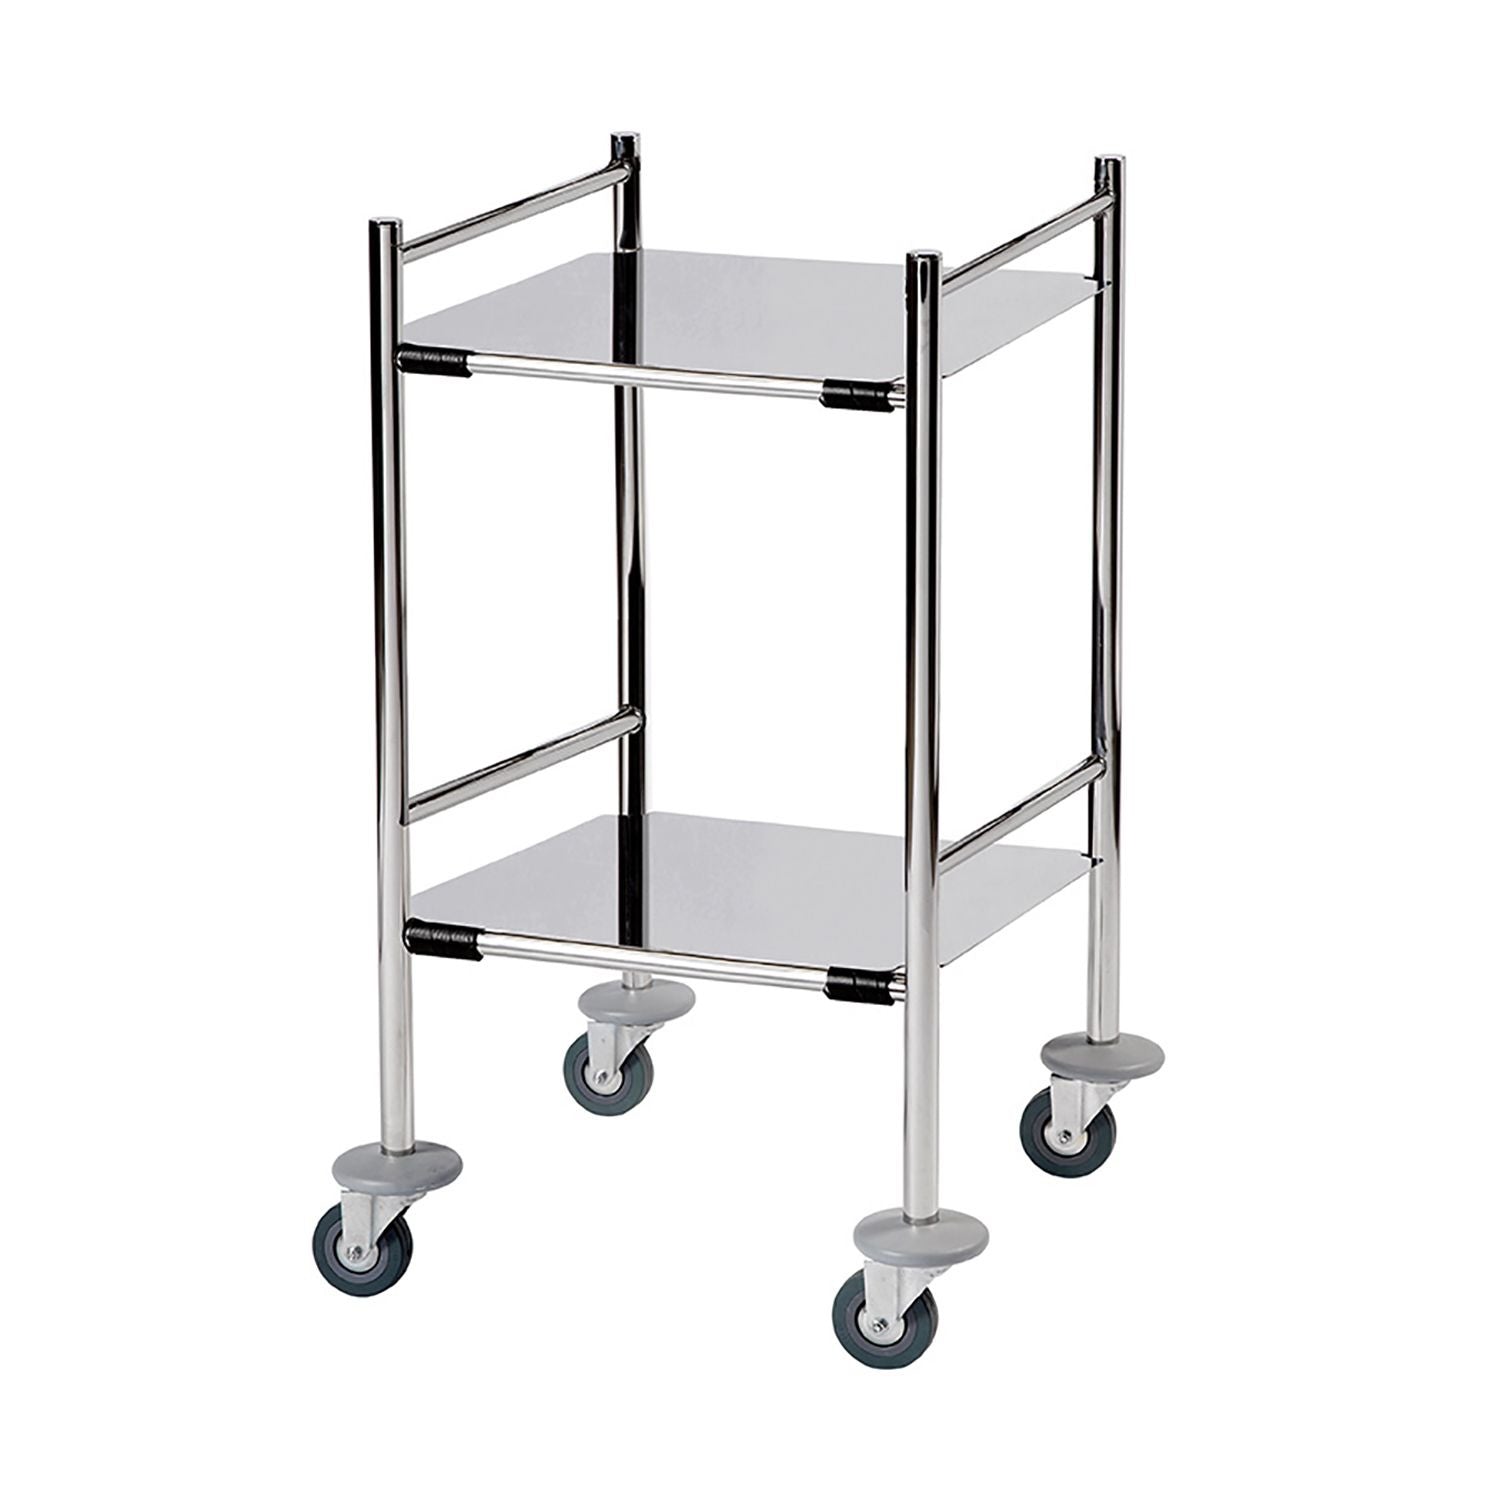 Extra Large 75cm Wide Mirror Polished Stainless Steel Surgical Trolley - 2 Fully Welded Fixed Shelves (Flange Down)